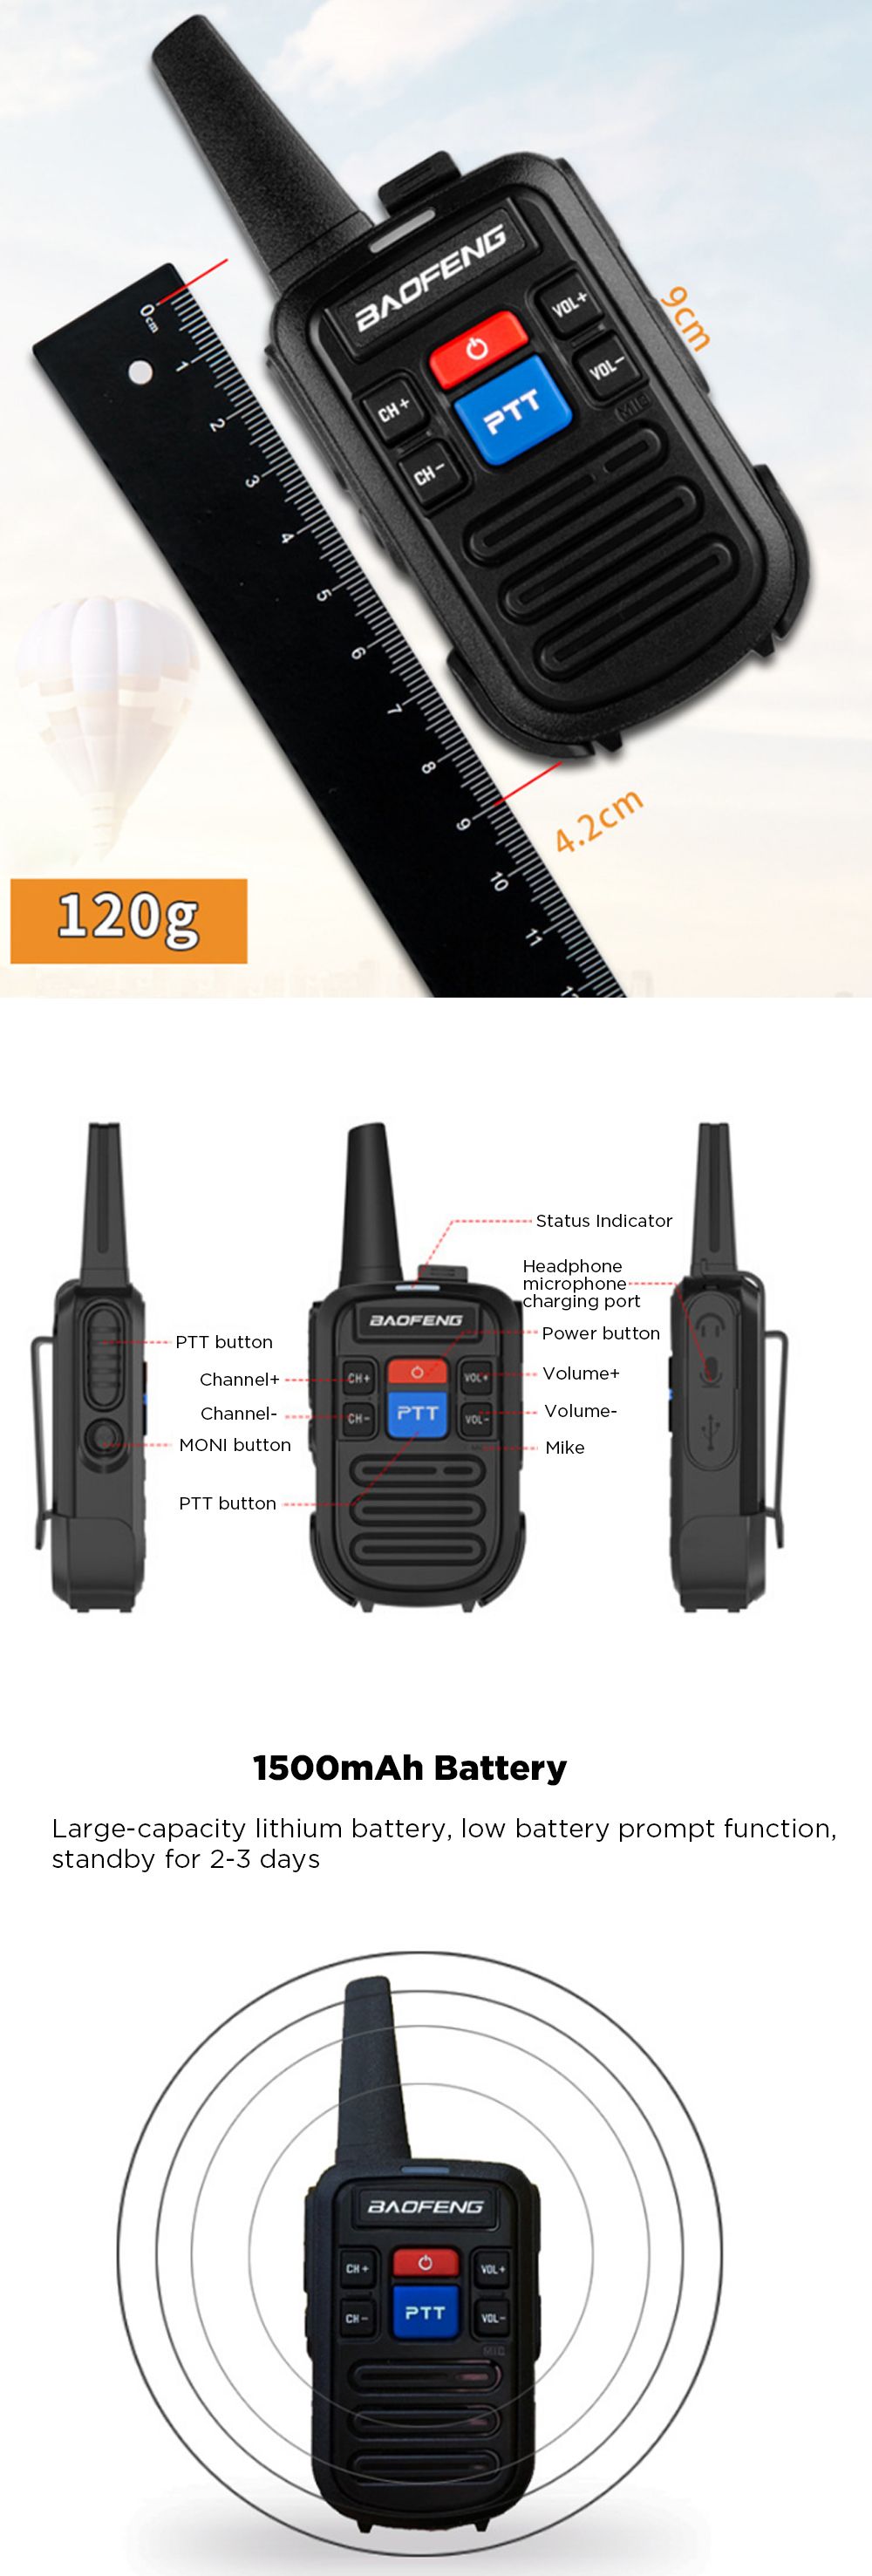 Baofeng-C50-2PCS-Walkie-Talkie-400-480MHz-Frequency-Range-99-Channel-USB-Rechargeable-Two-Way-Radios-1709193